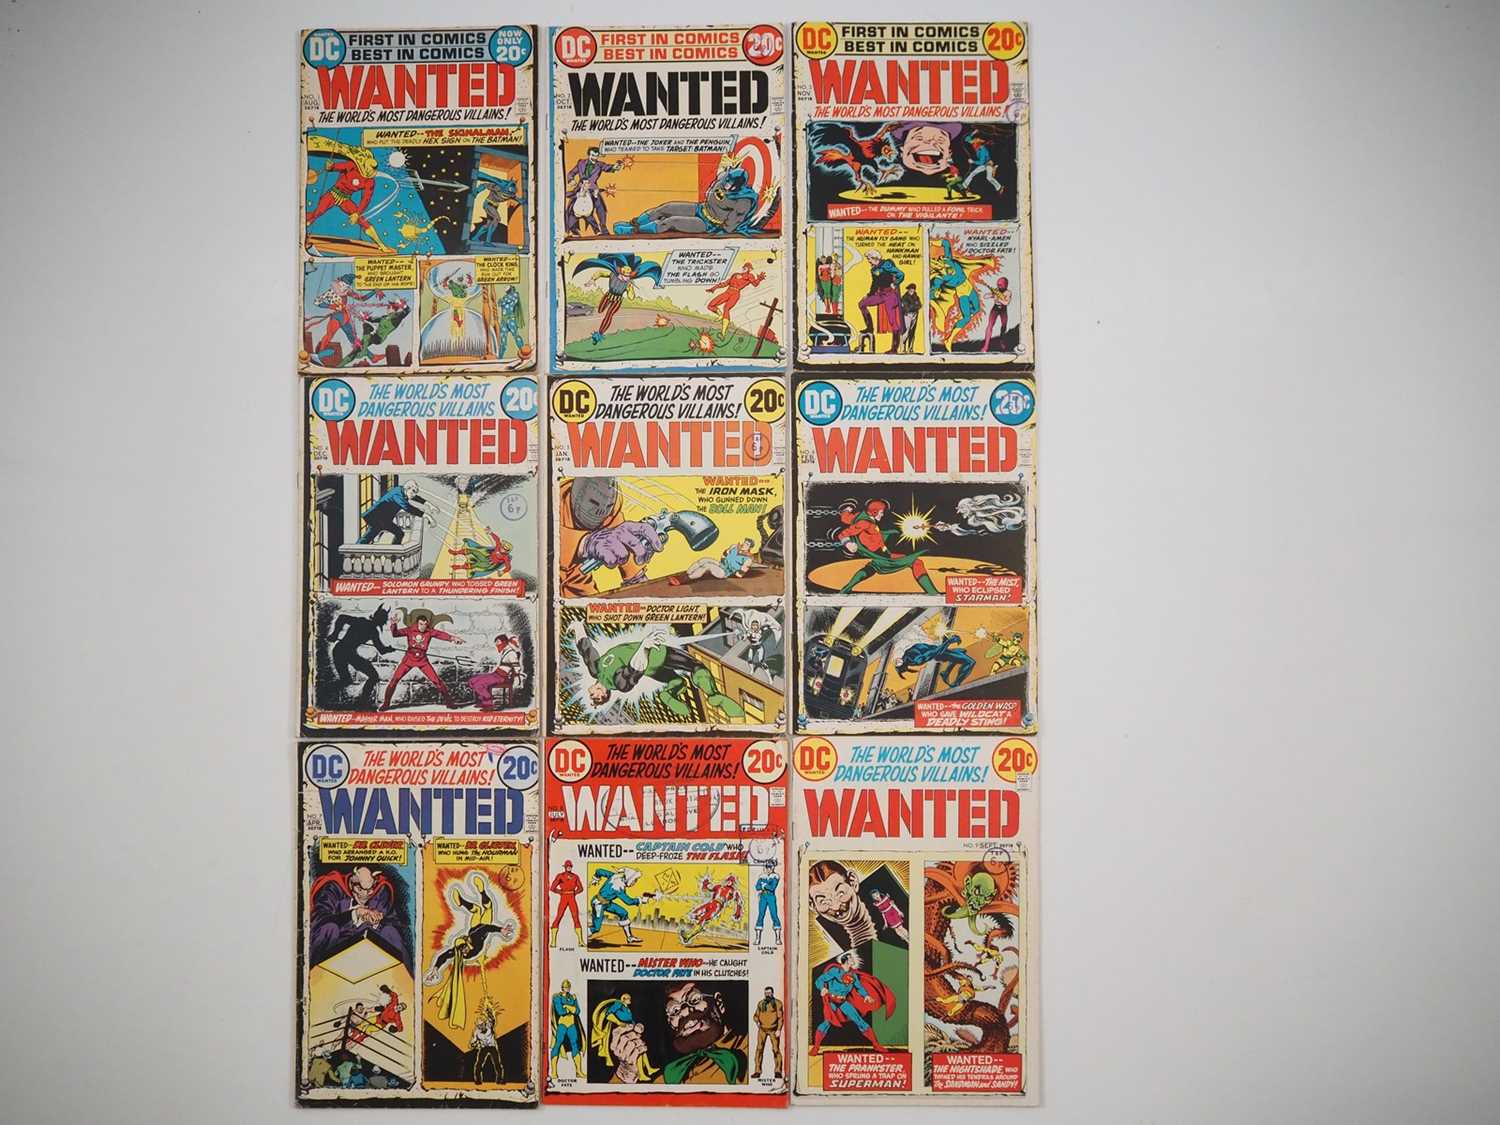 WANTED: THE WORLD'S MOST DANGEROUS VILLAINS #1, 2, 3, 4, 5, 6, 7, 8, 9 (9 in Lot) - (1972/1973 - DC)